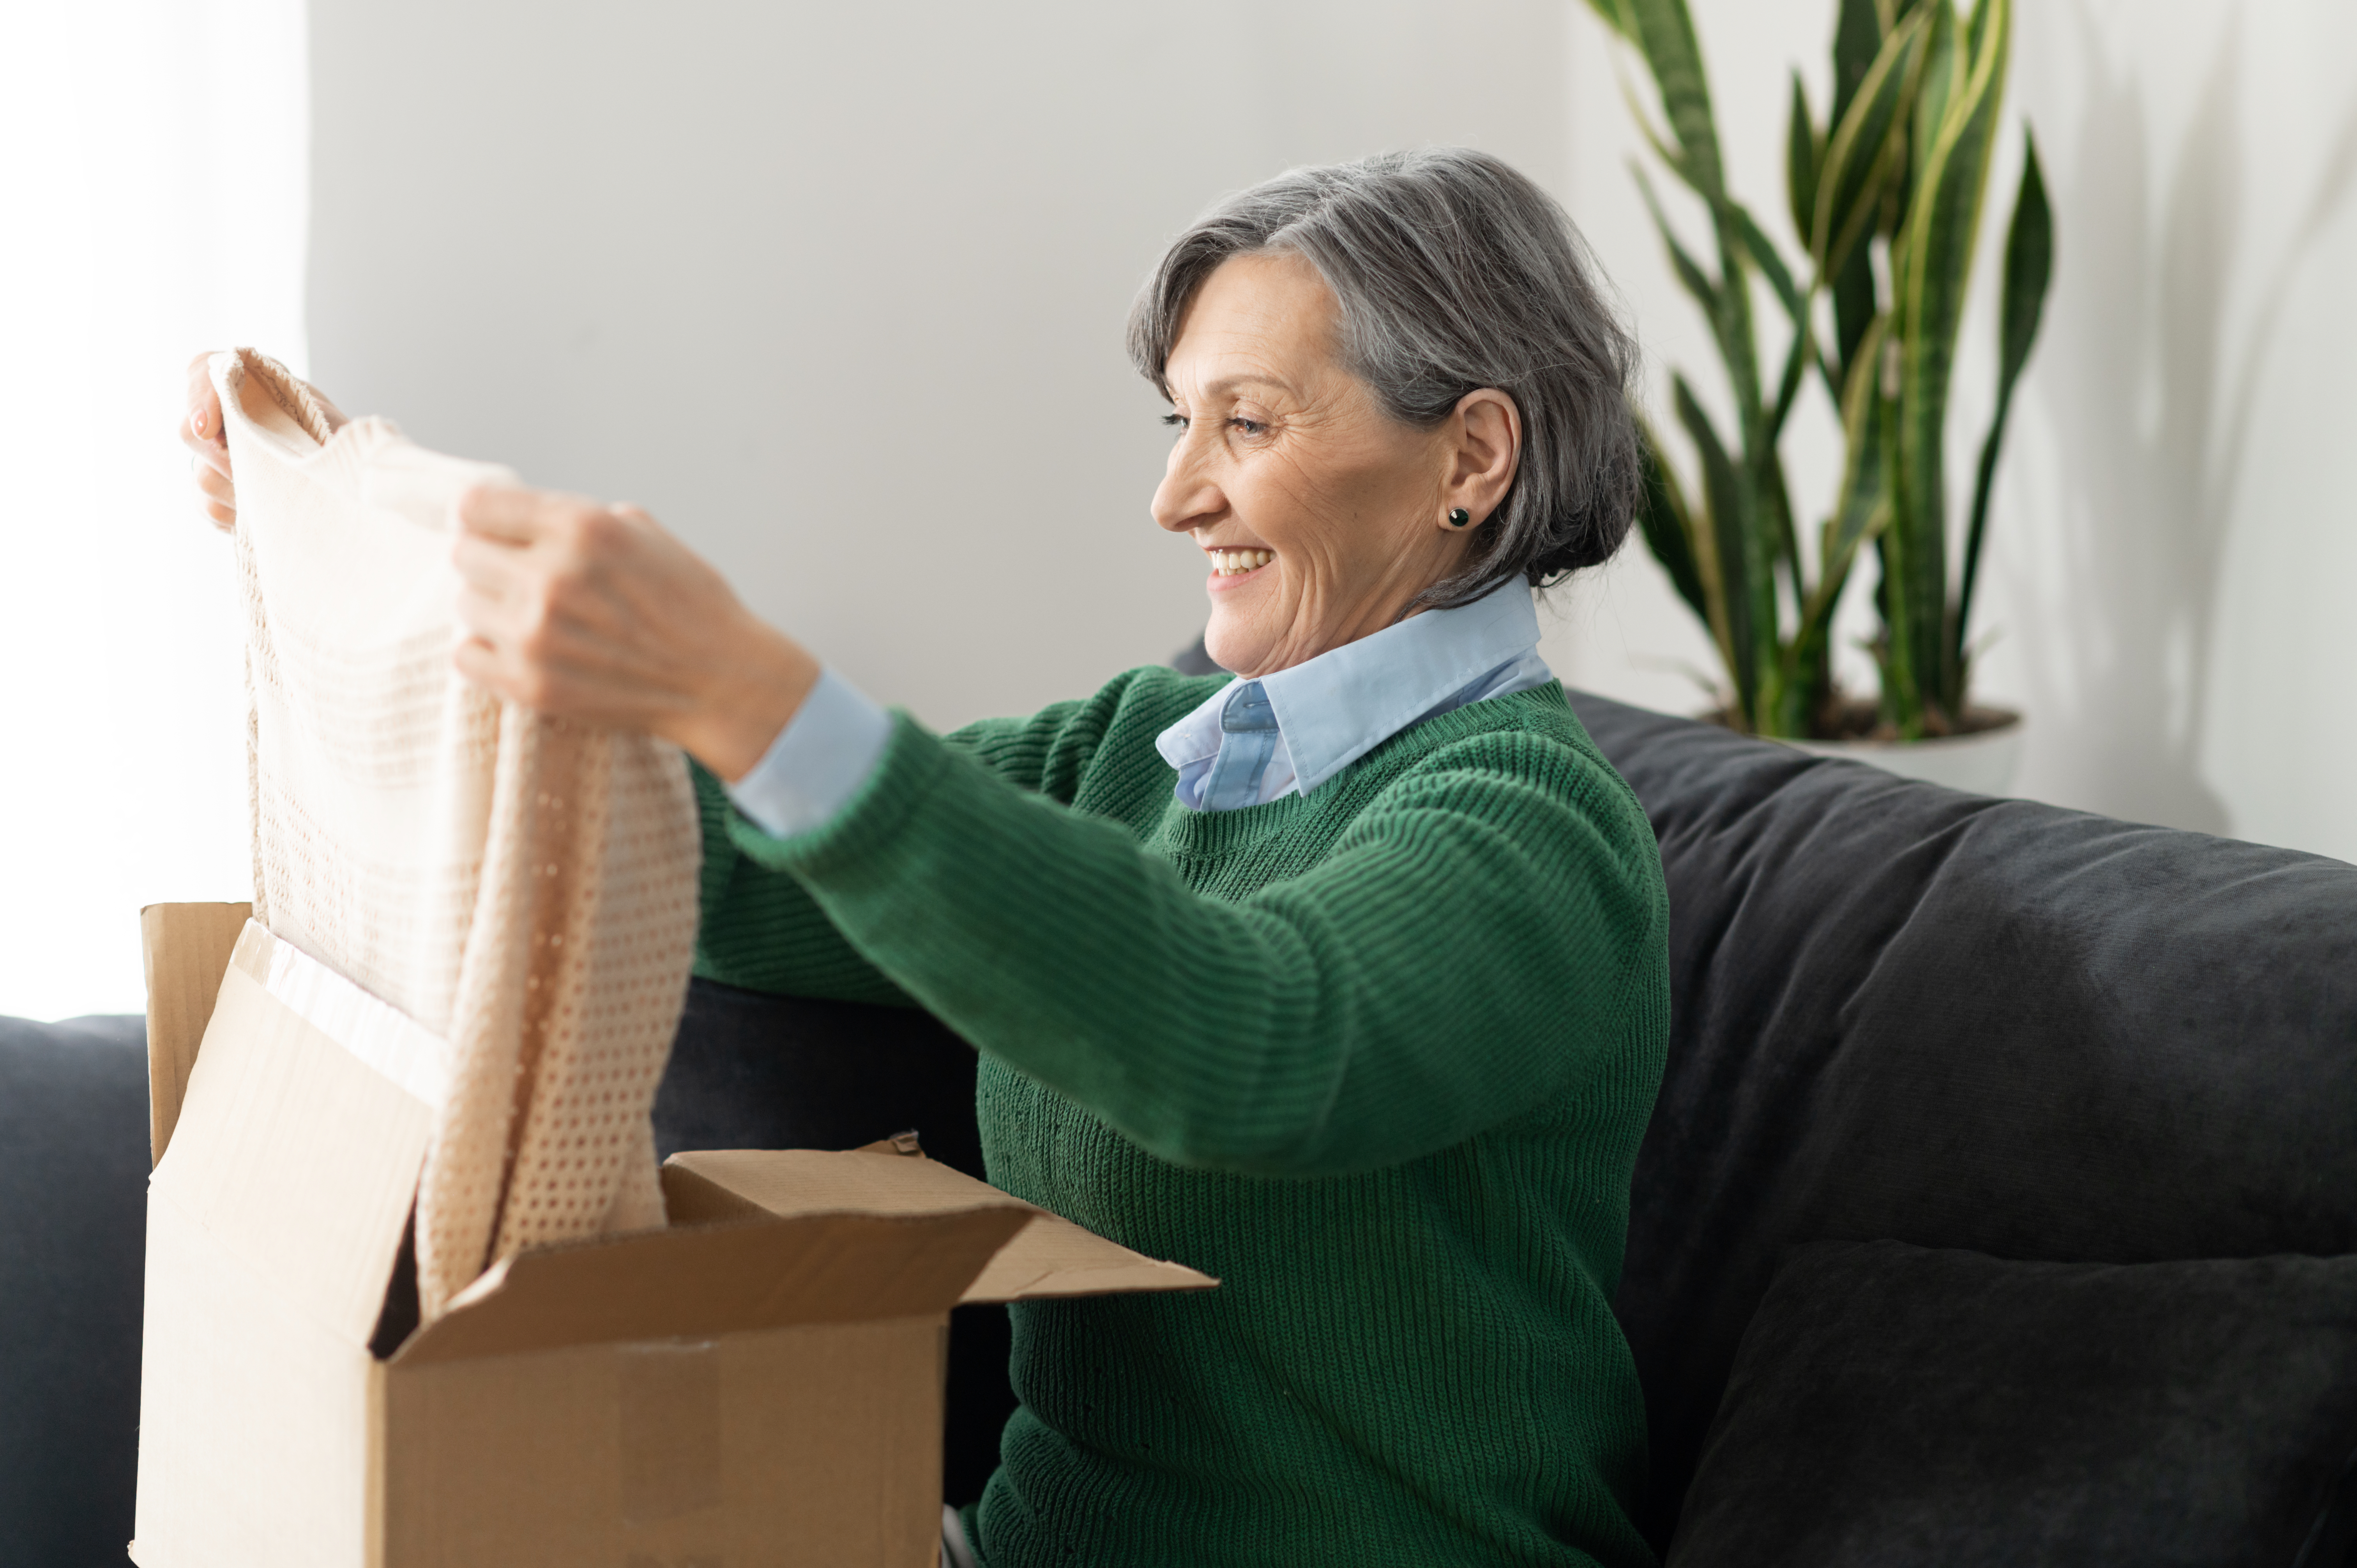 A woman sitting on a sofa and smiling as she unpacks a beige jumper. 